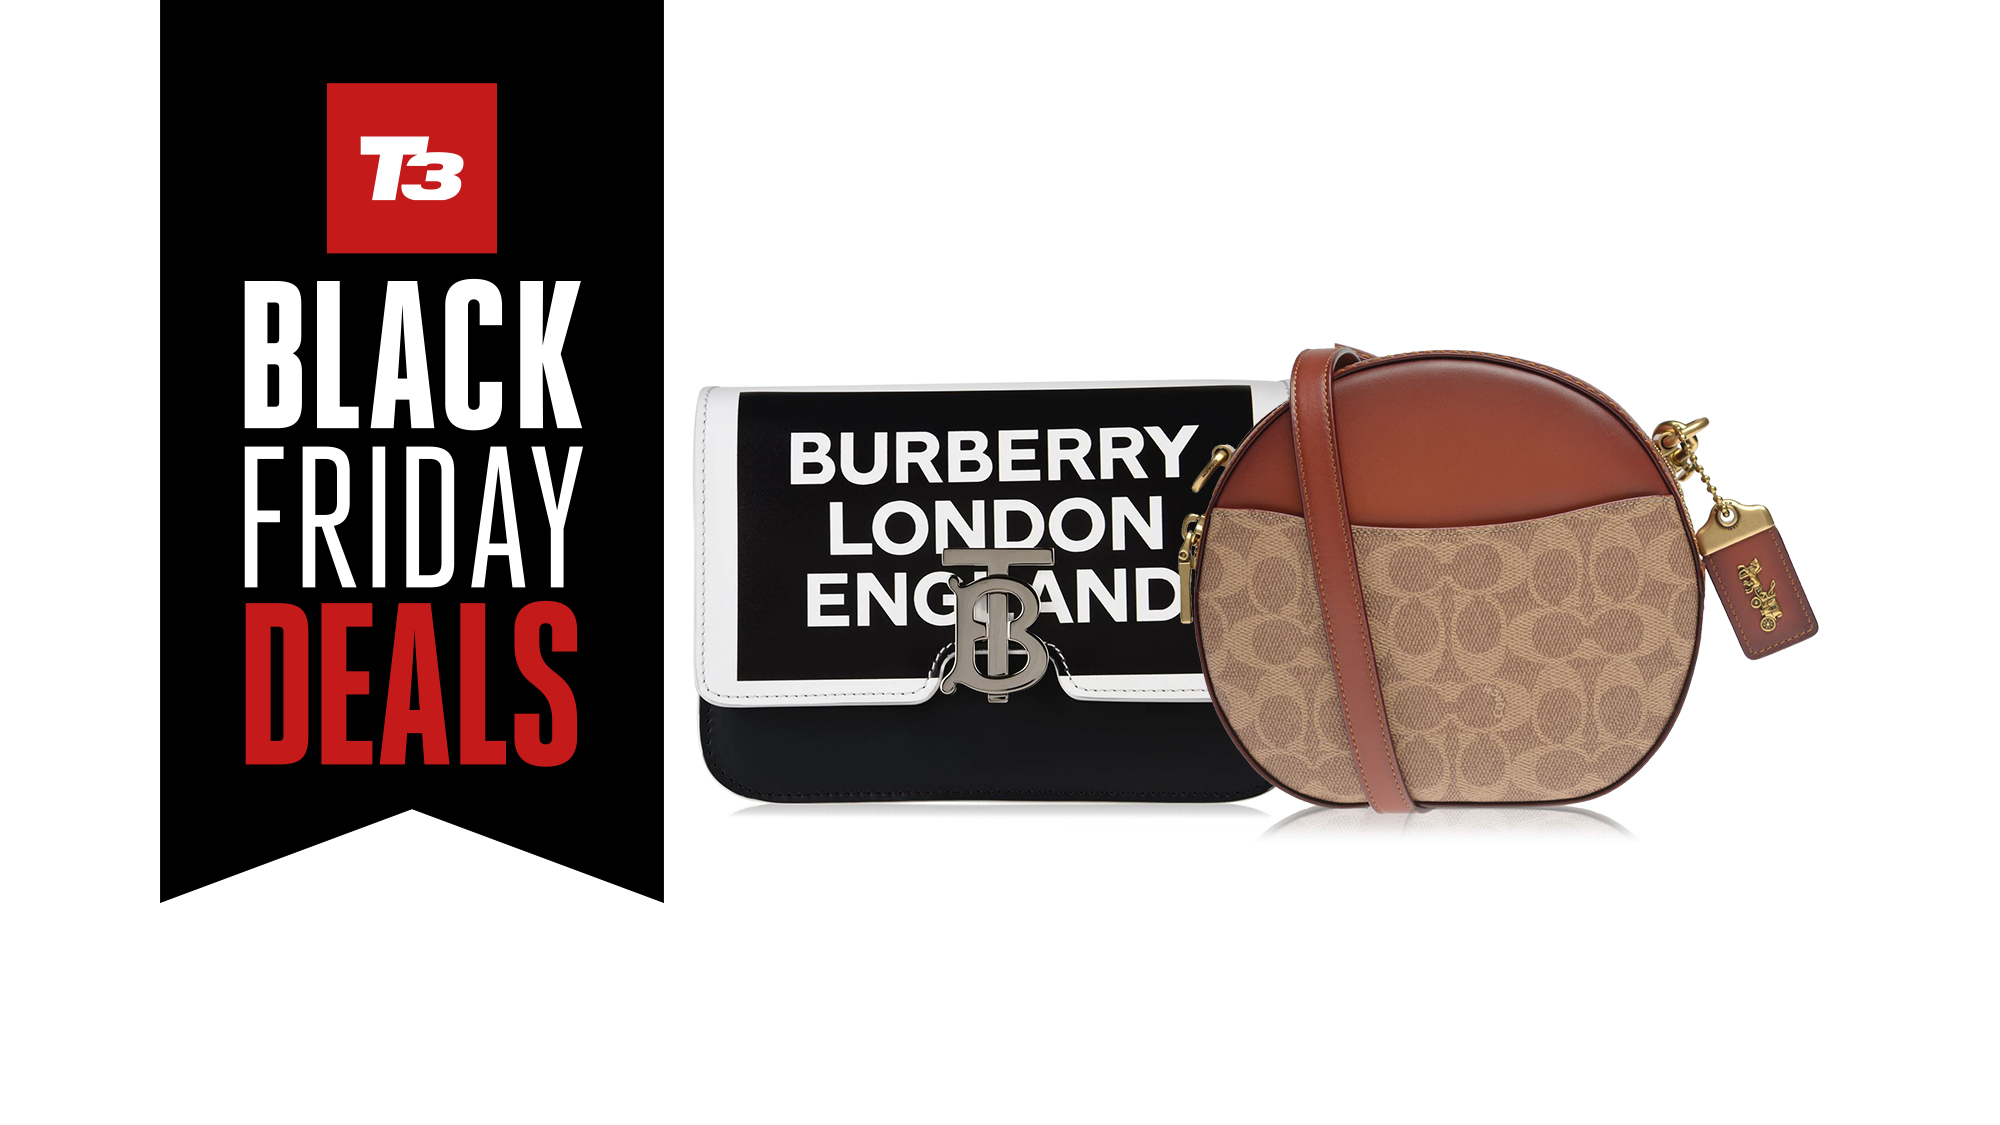 Black Friday handbags deals save on Coach, Burberry, Fendi and more! T3